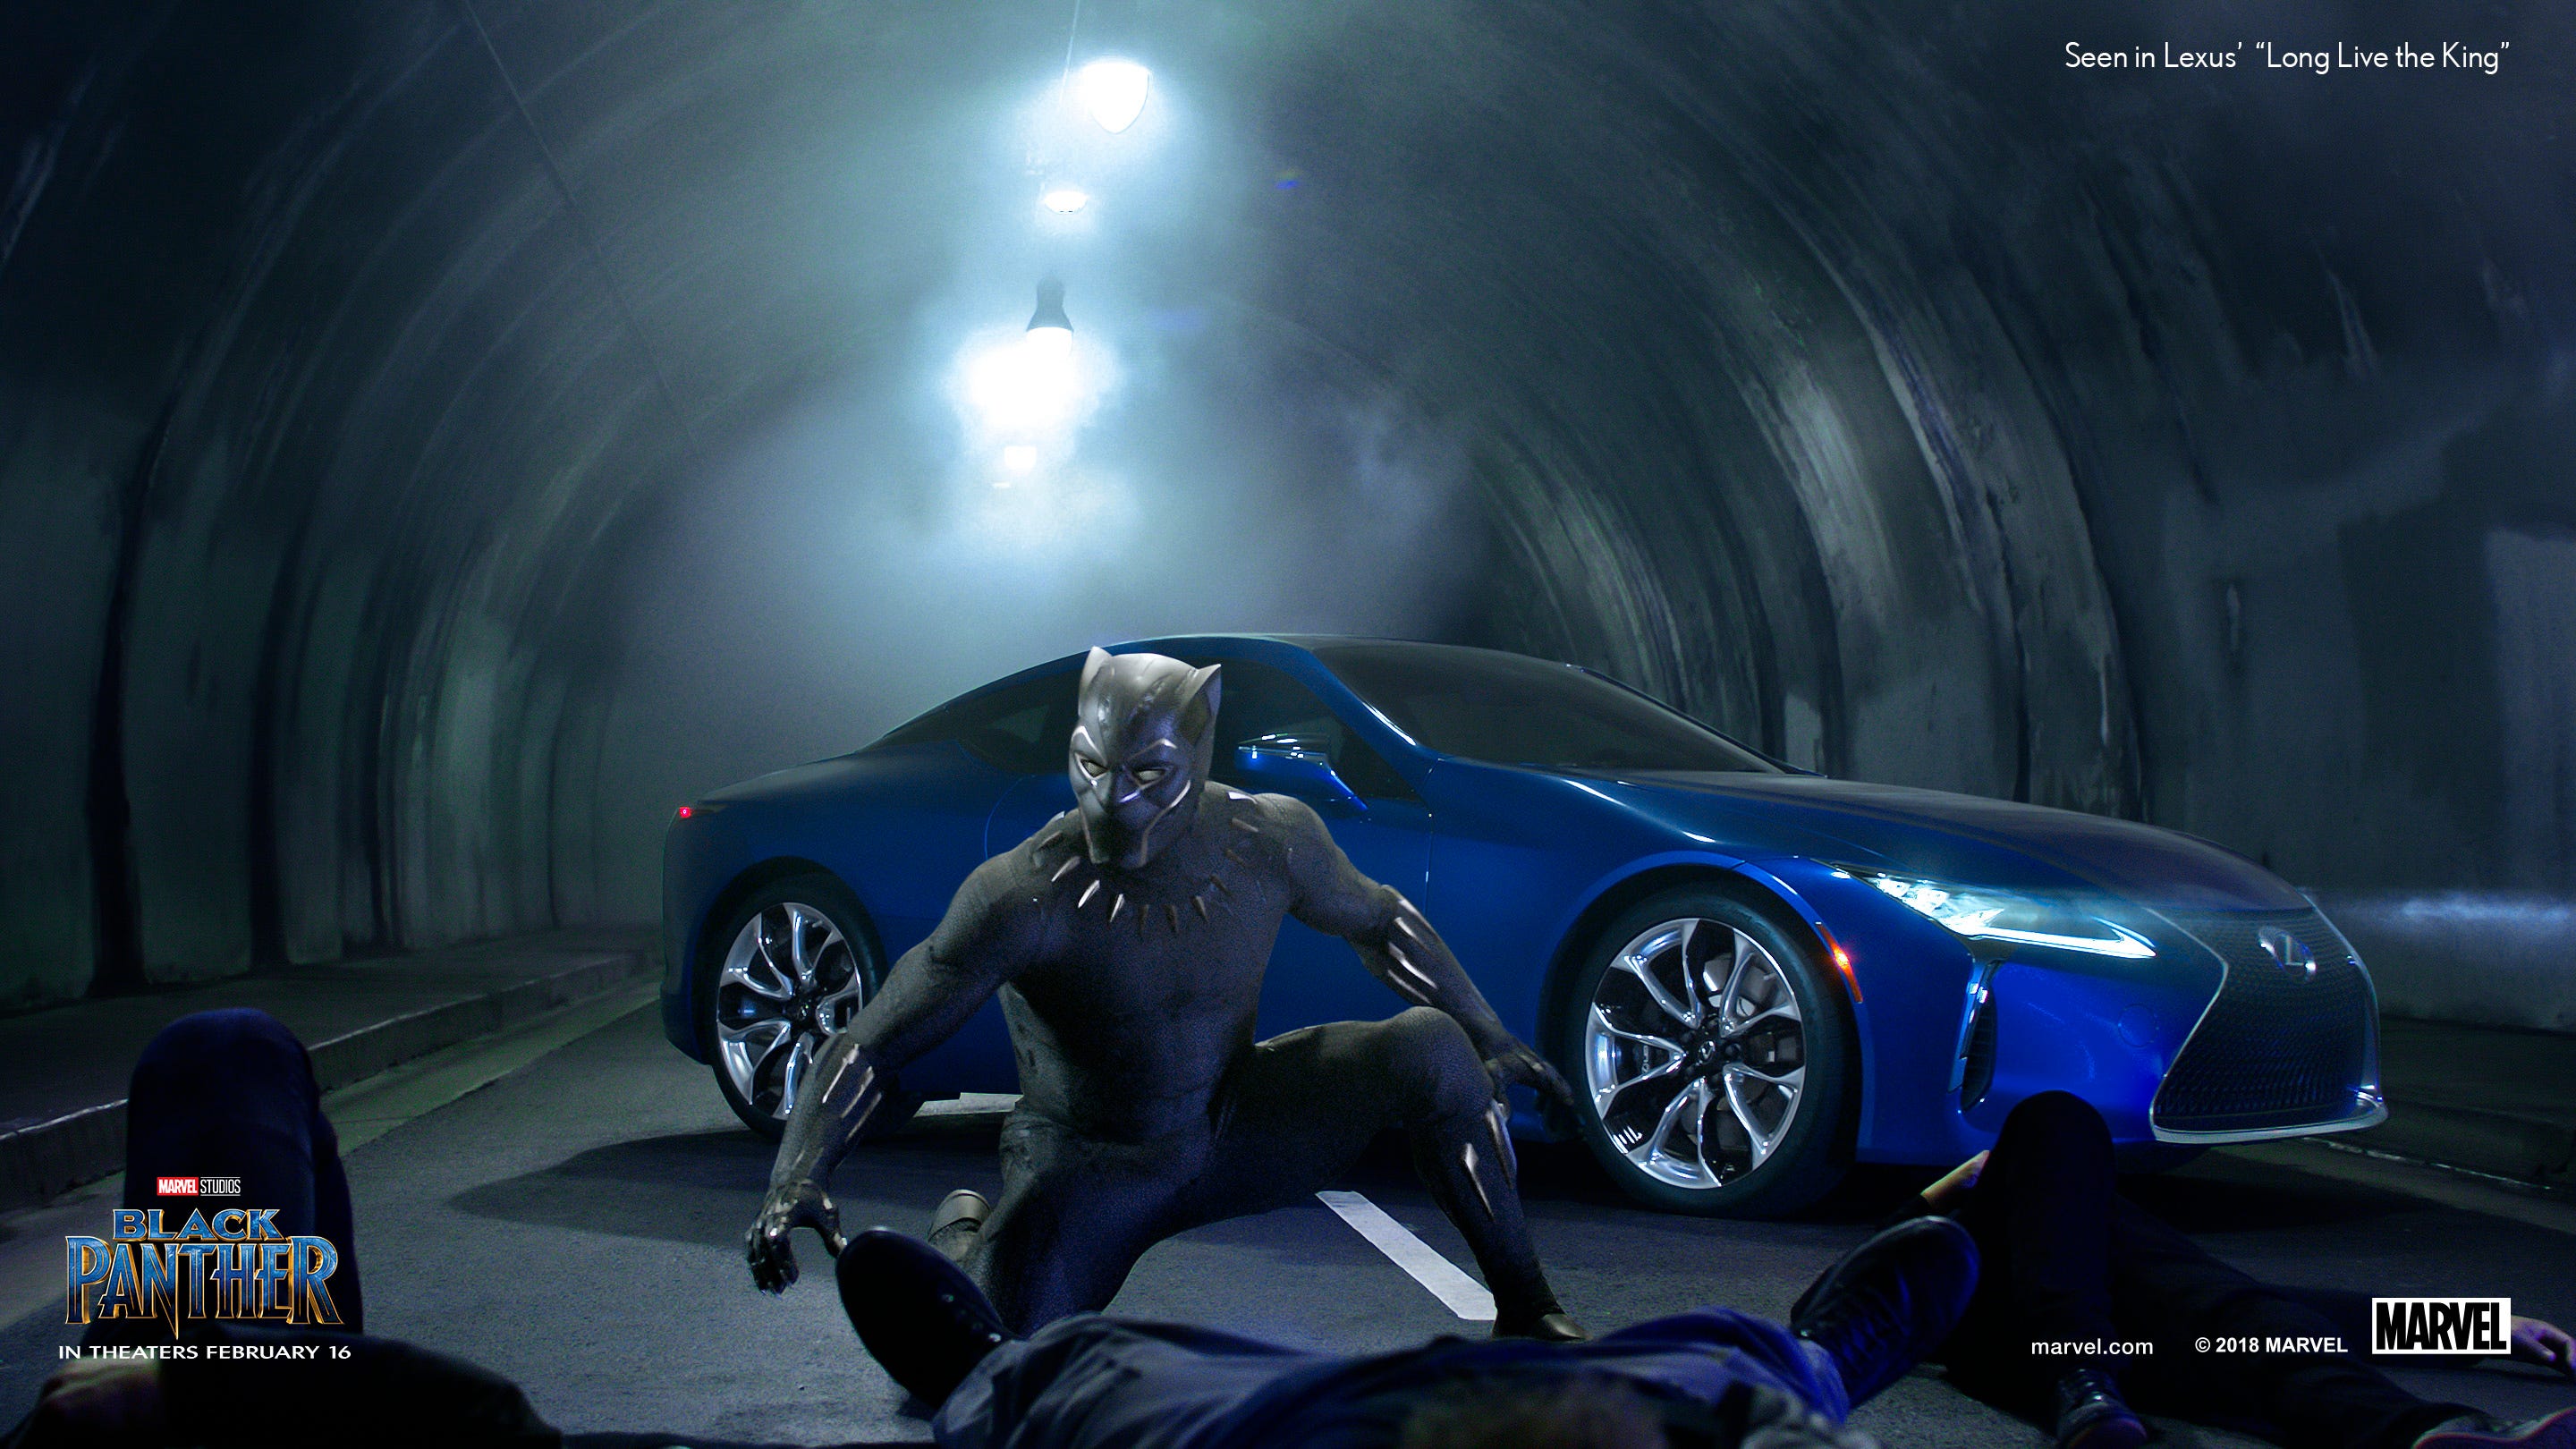 Black Panther, played by Chadwick Boseman, drives new Lexus in Super Bowl ad